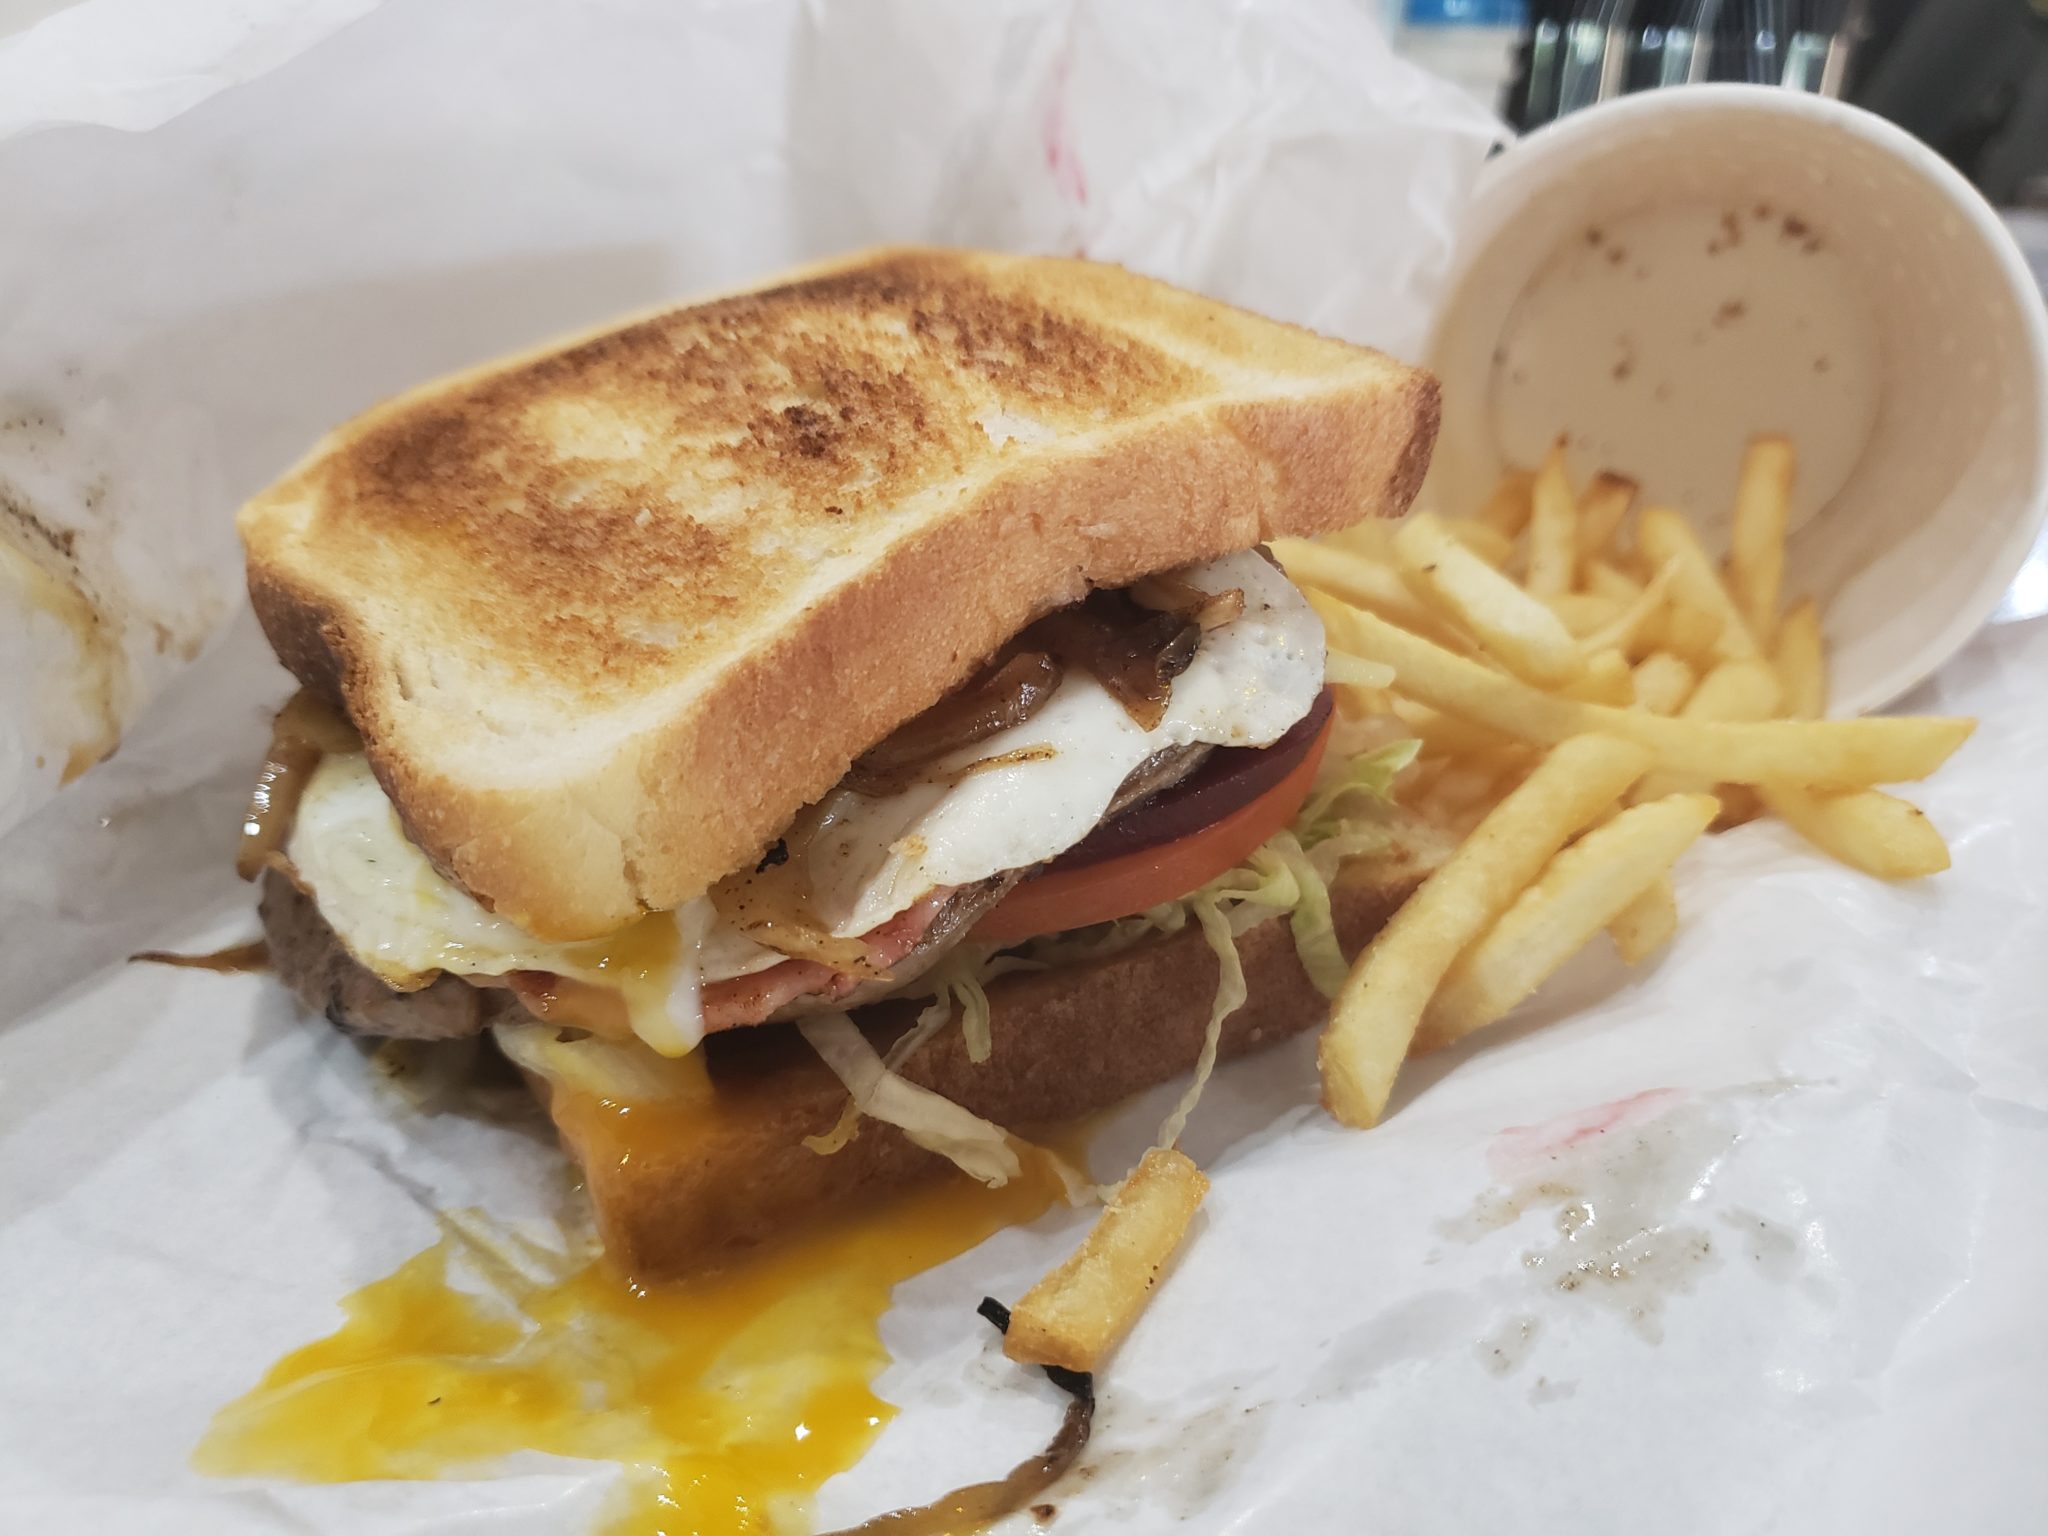 a sandwich with fries and sauce